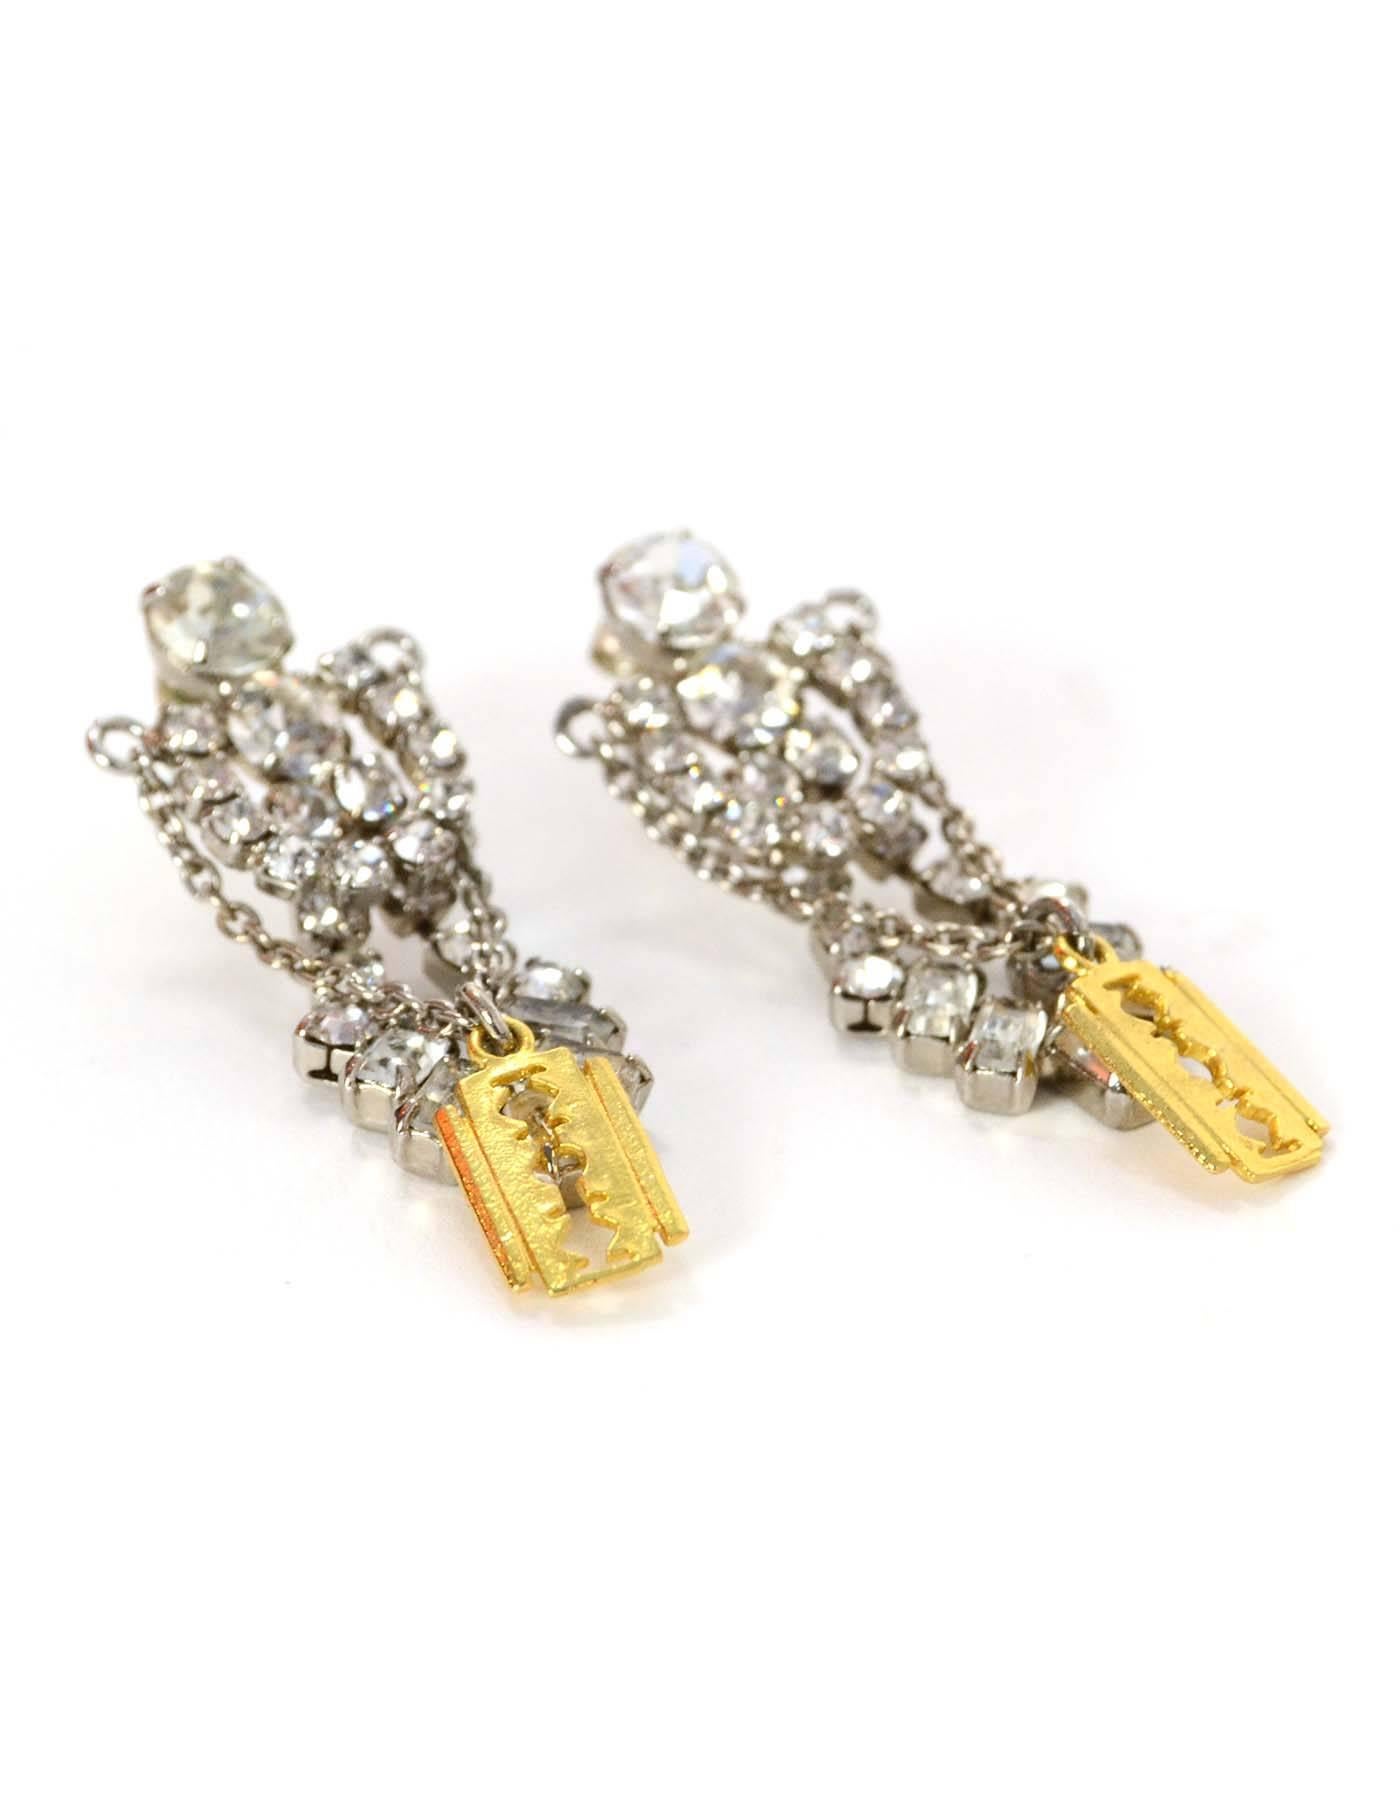 Tom Binns Crystal & Gold Razor Chandelier Earrings
Features crystal drop design with goldtone razor hanging in front
Made In: U.S.A
Color: Goldtone and silvertone
Materials: Metal and crystal
Closure: Pierced back closure
Overall Condition: